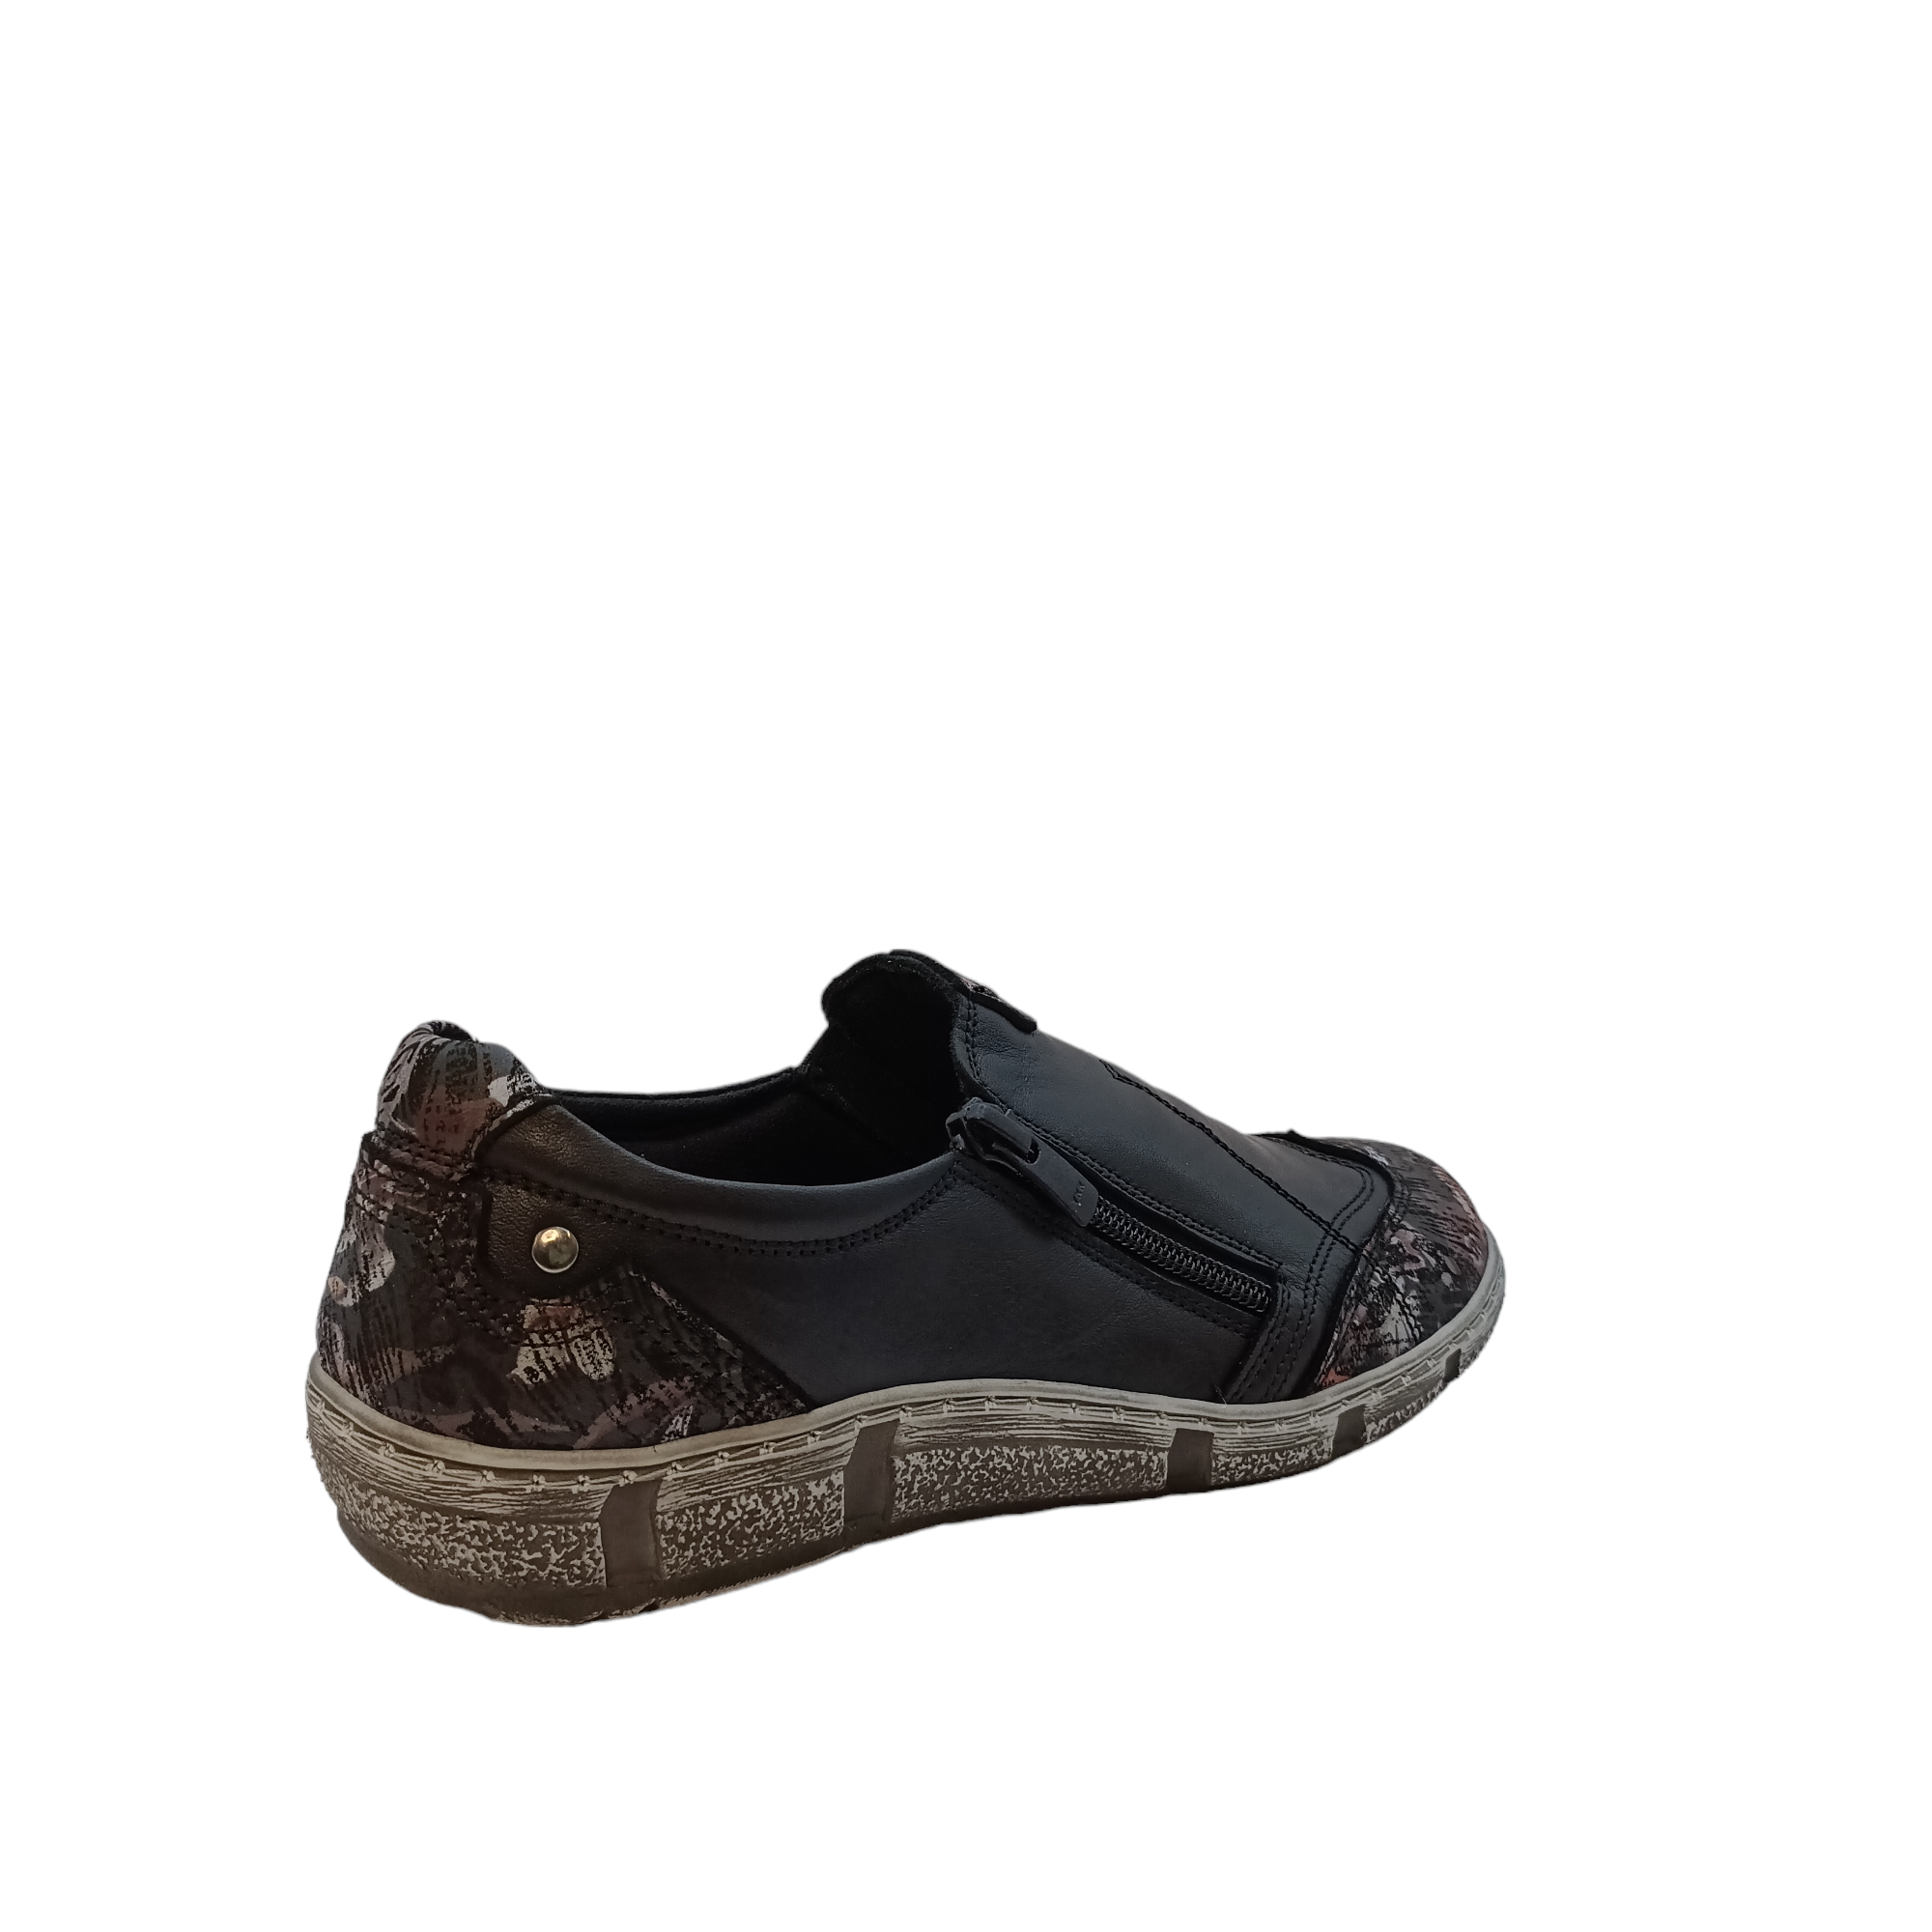 Shop CP794-57 Cabello - with shoe&me - from Cabello - Shoes - Shoe, Winter, Womens - [collection]